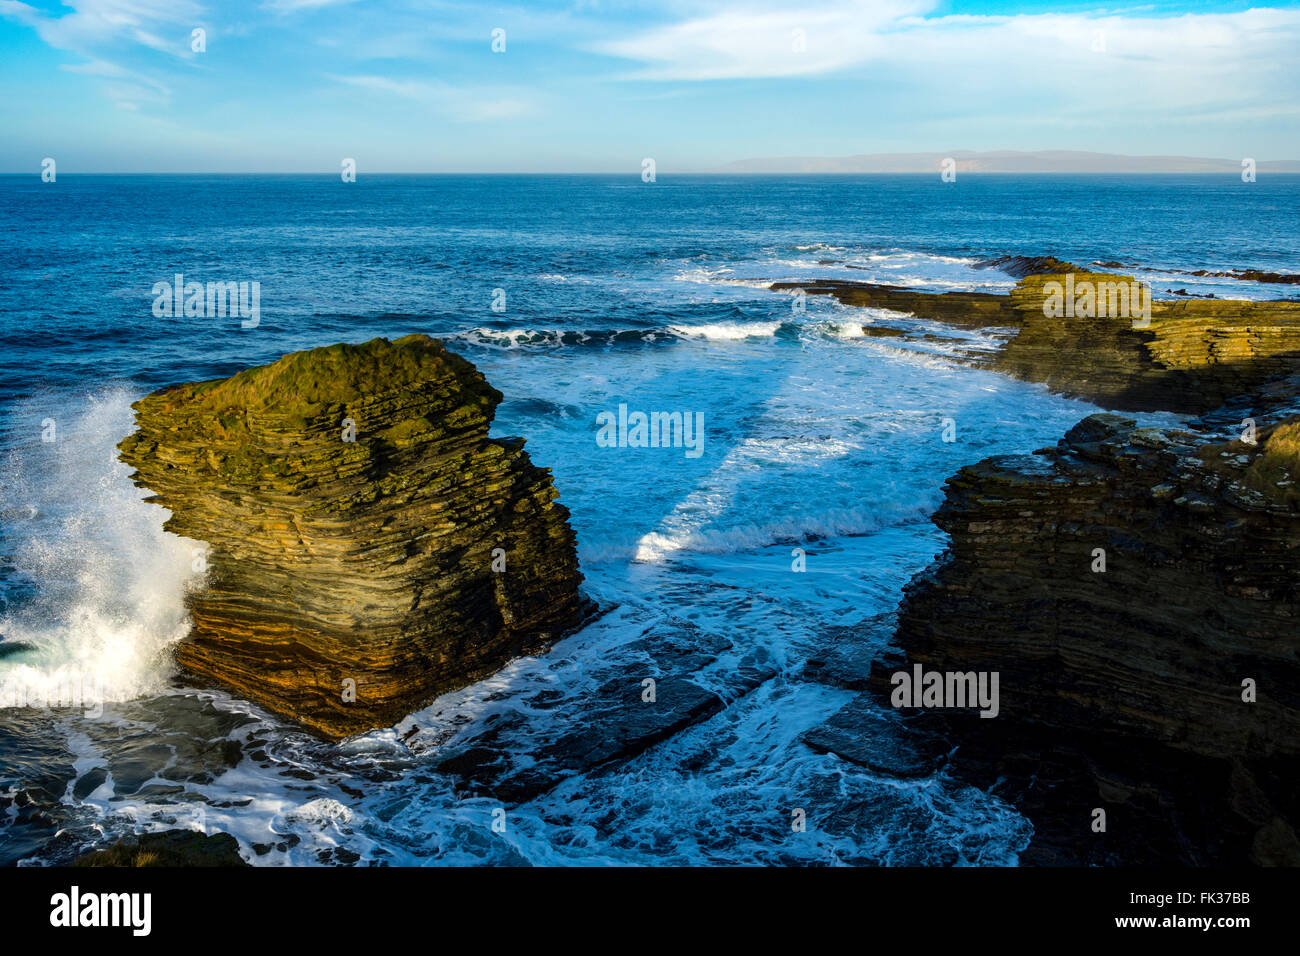 Sea stack from the coastal path near Scarfskerry, Caithness, Scotland, UK.  In the distance is Hoy in the Orkney Islands. Stock Photo